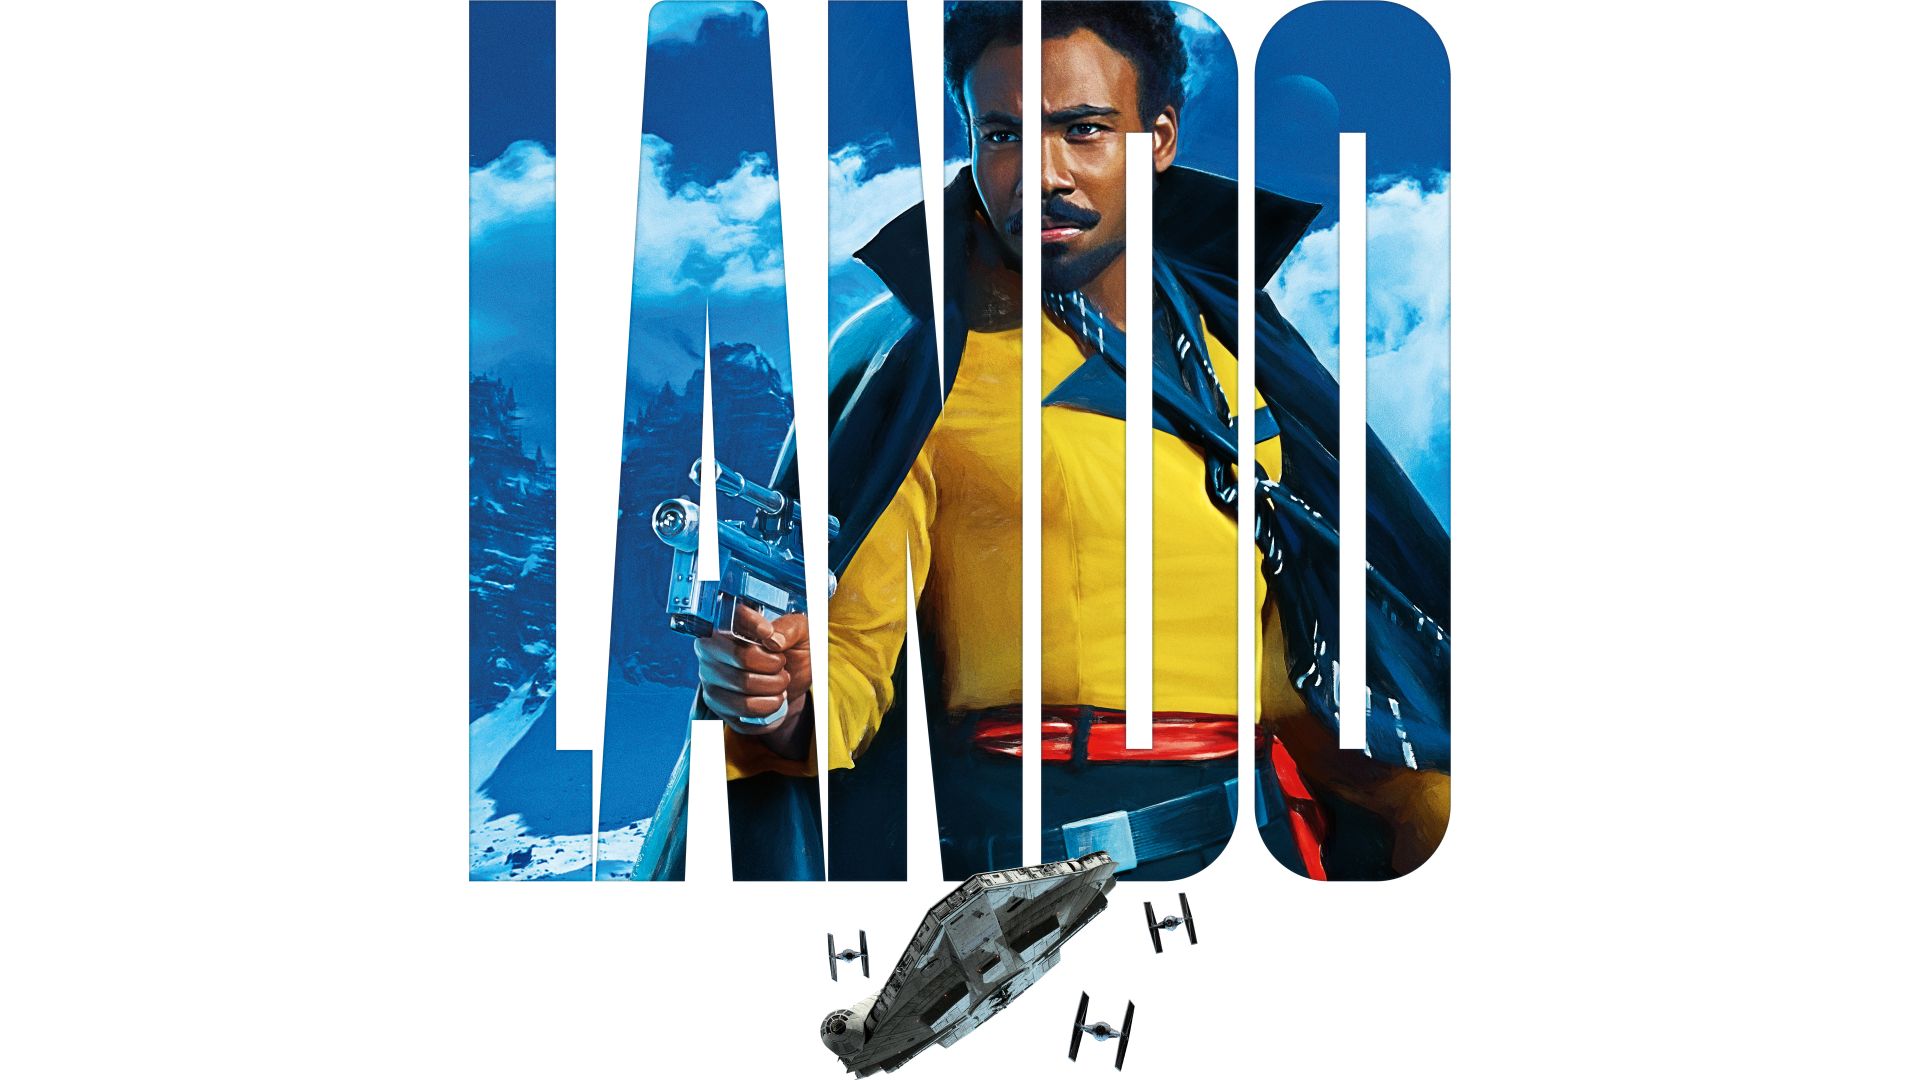 Solo: A Star Wars Story, Donald Glover, 8k (horizontal)